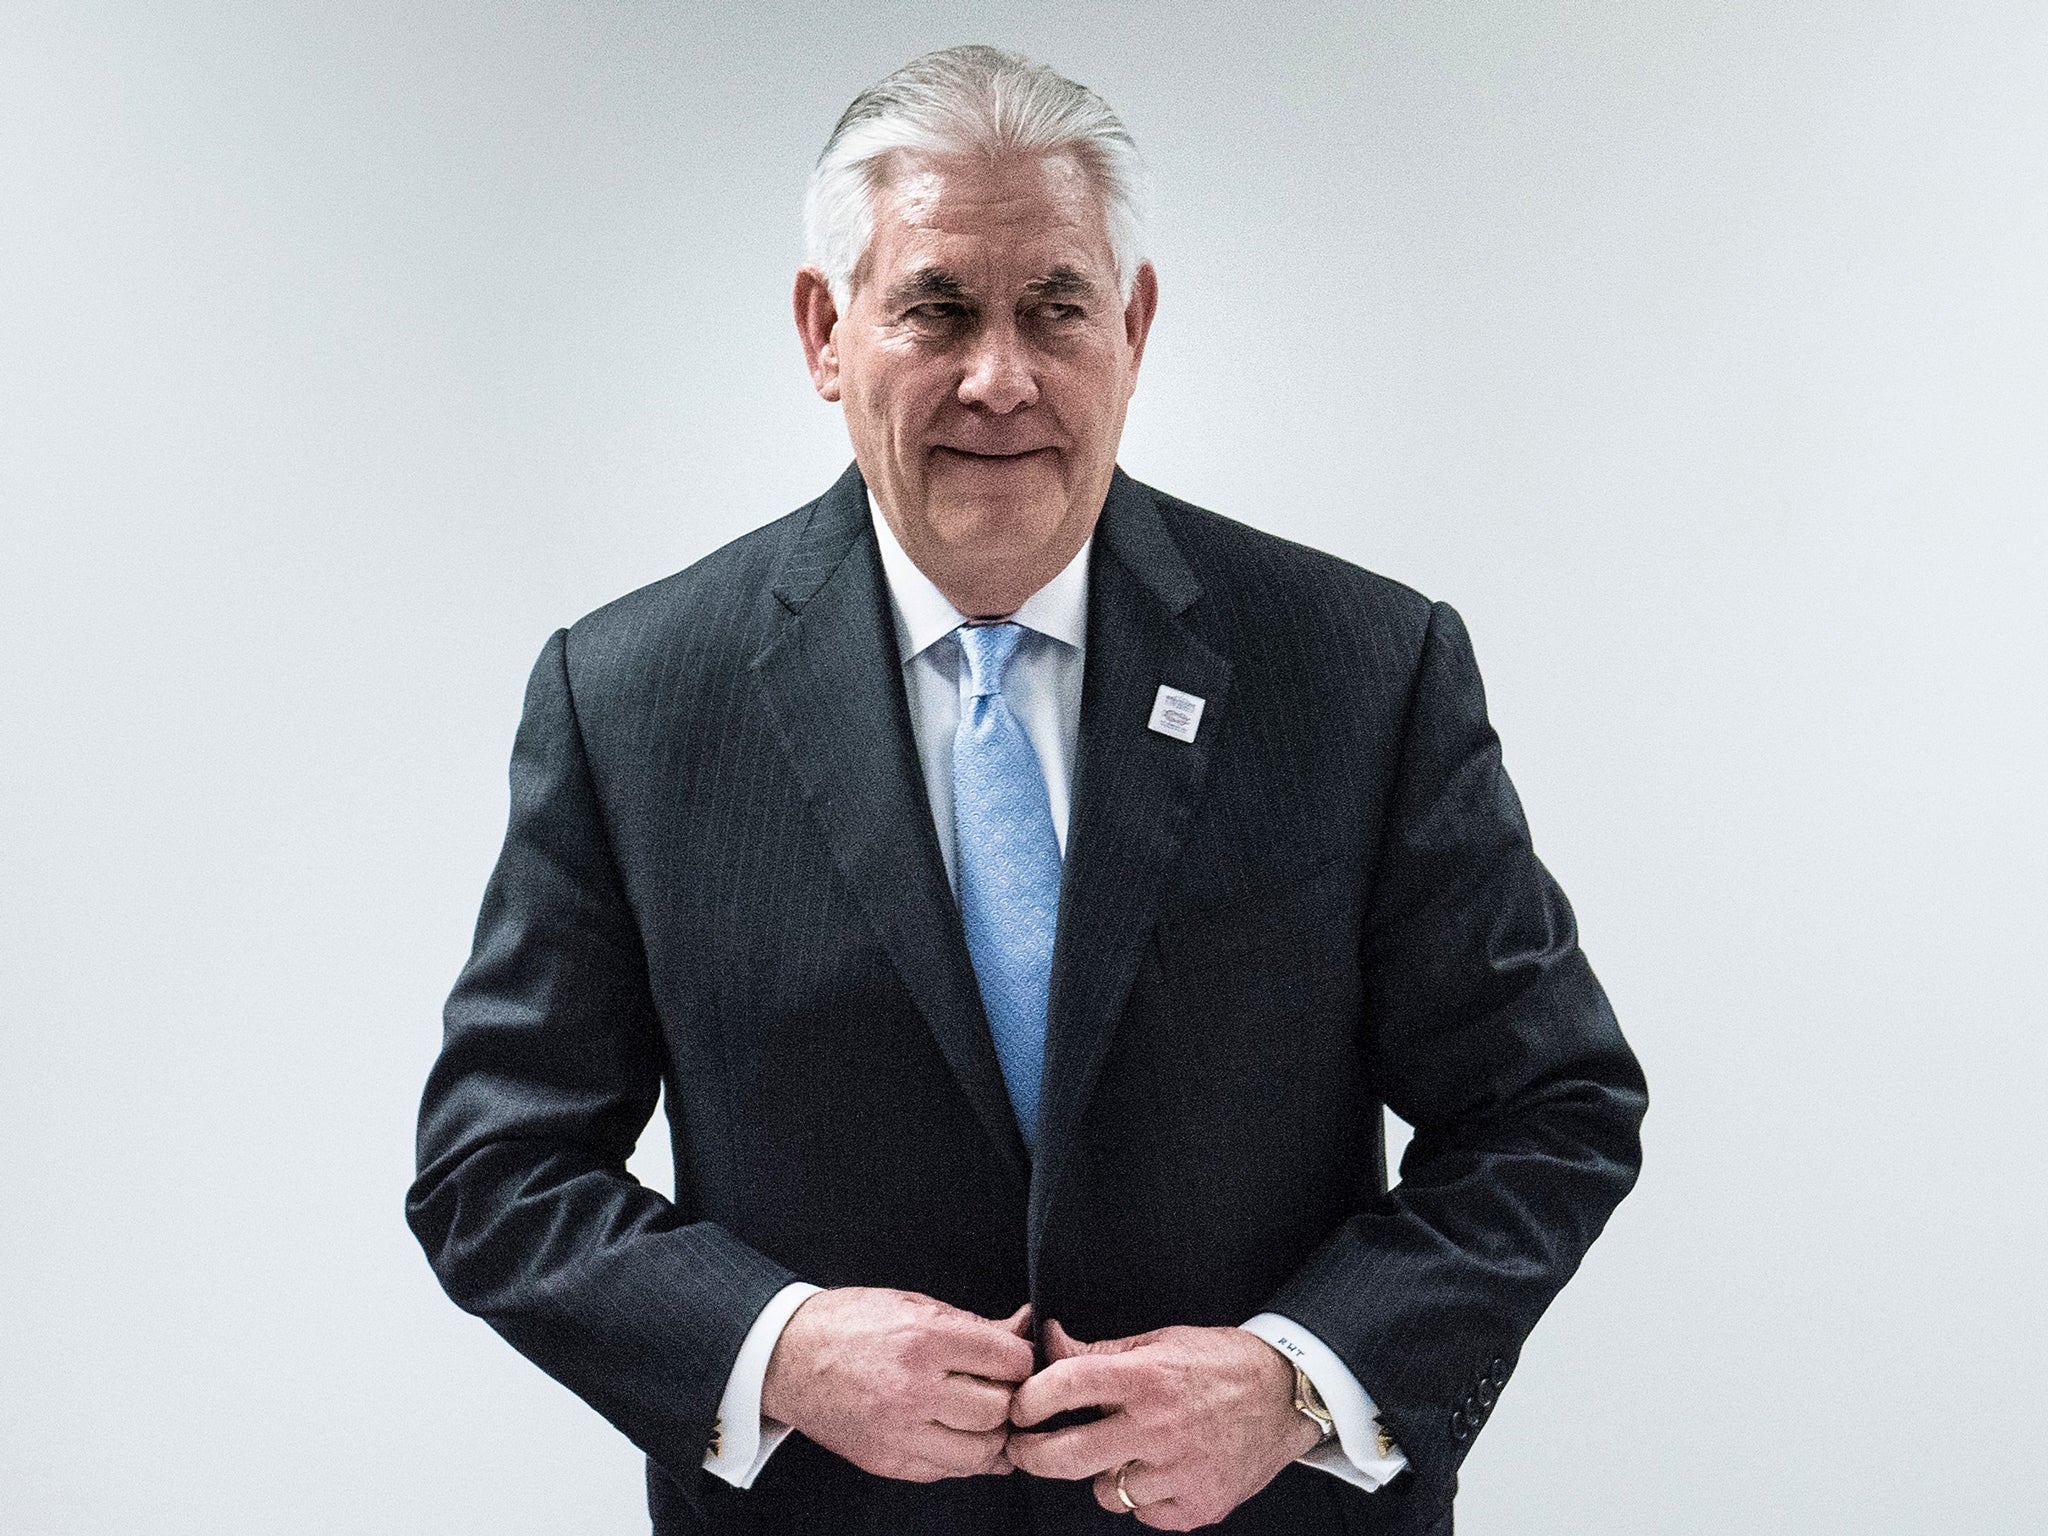 Secretary of State Tillerson at G20